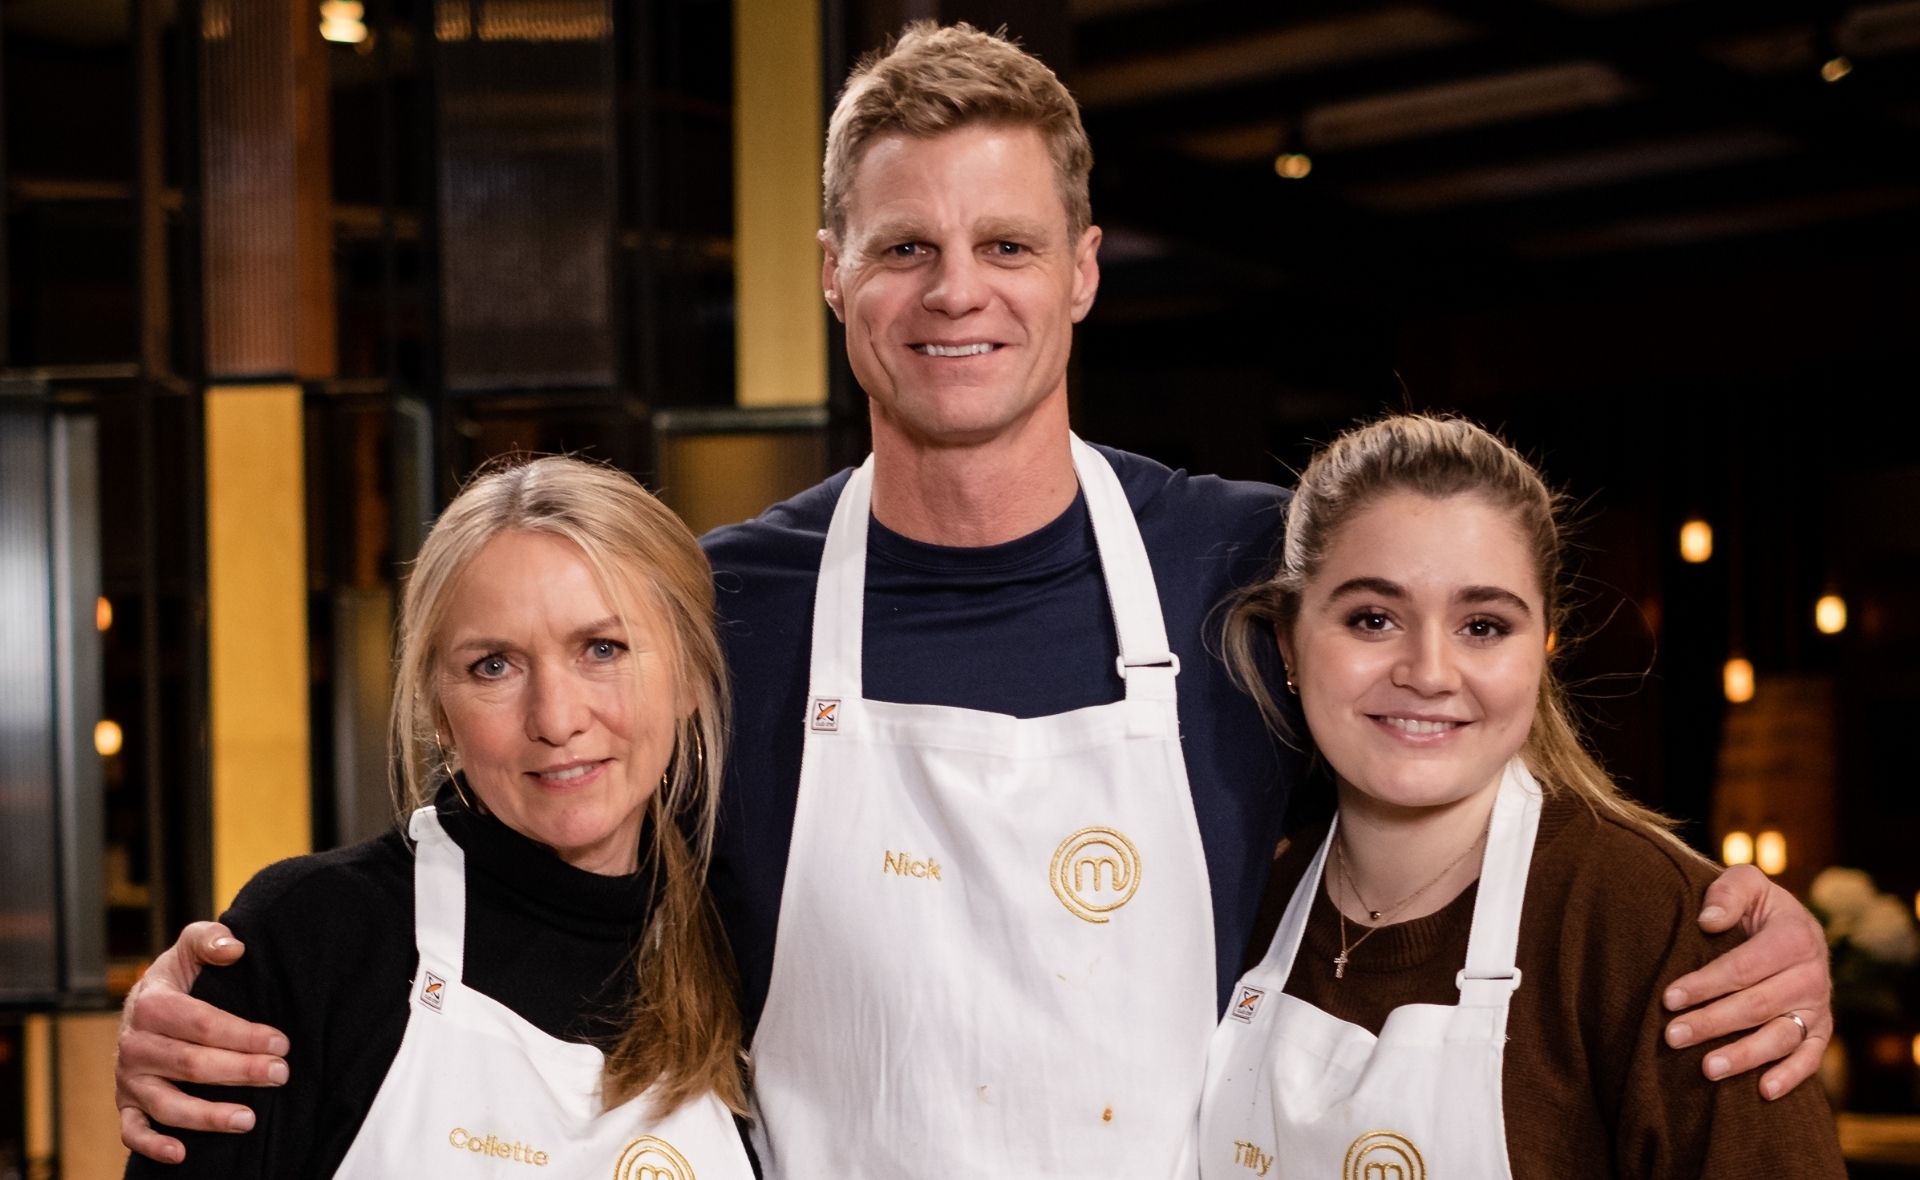 The winner of Celebrity MasterChef 2021 has been crowned and it’s Nick Riewoldt!